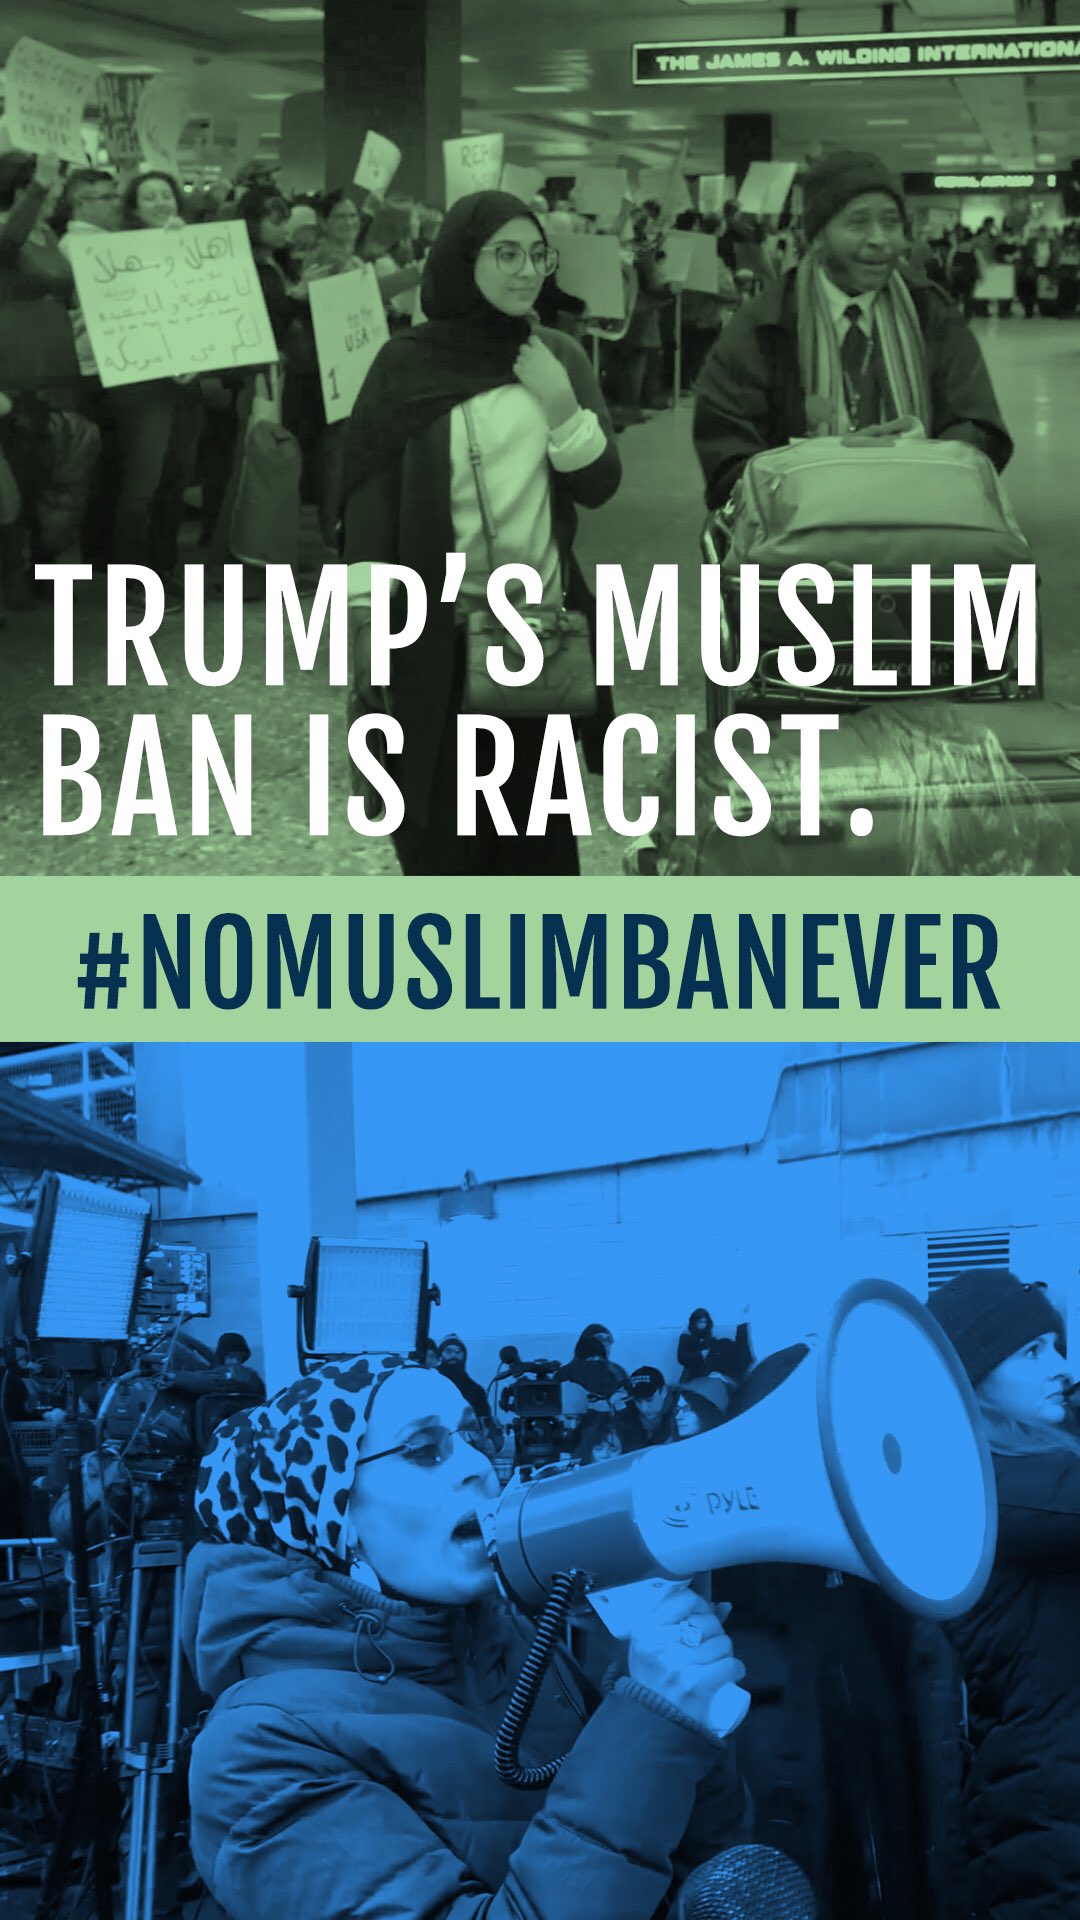 PANA Statement on President’s Third Attempt at a Muslim Ban: Original Intent to Discriminate Remains and Is Now Indefinite